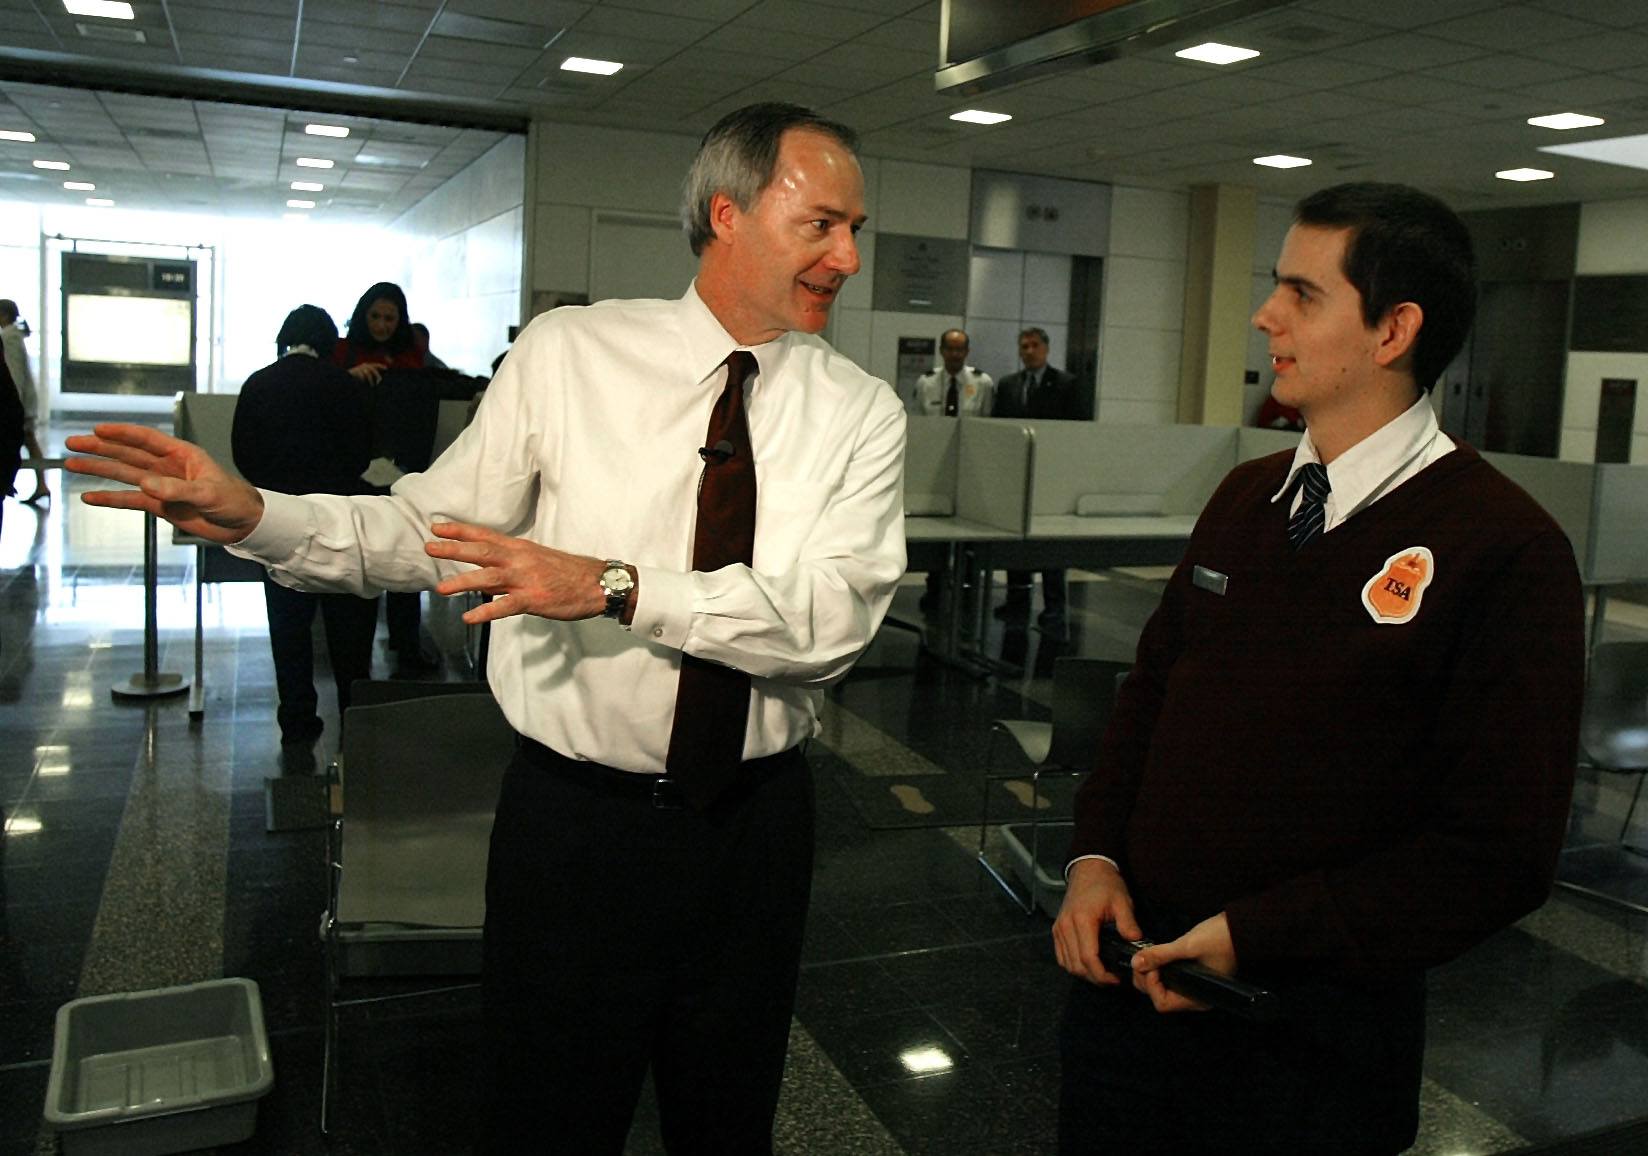 Undersecretary for Border and Transportation Security Asa Hutchinson (L) talks to a Transportation Security Administration